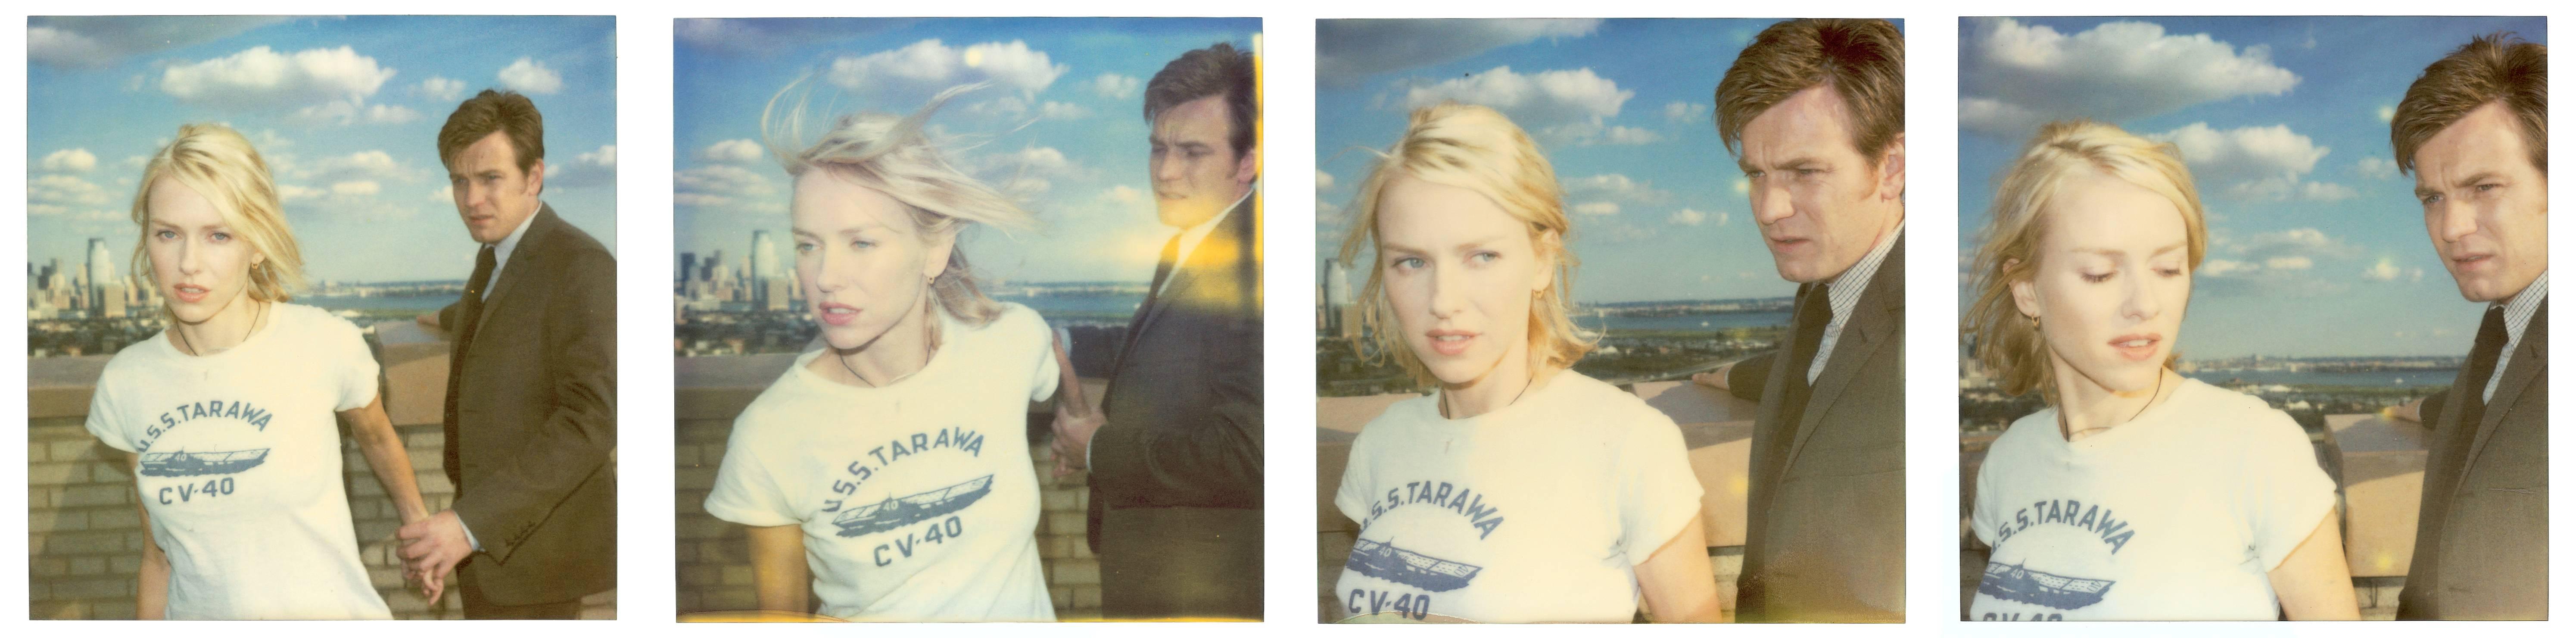 Lila and Sam from the movie Stay with Ewan McGregor, Naomi Watts - part II - Photograph by Stefanie Schneider